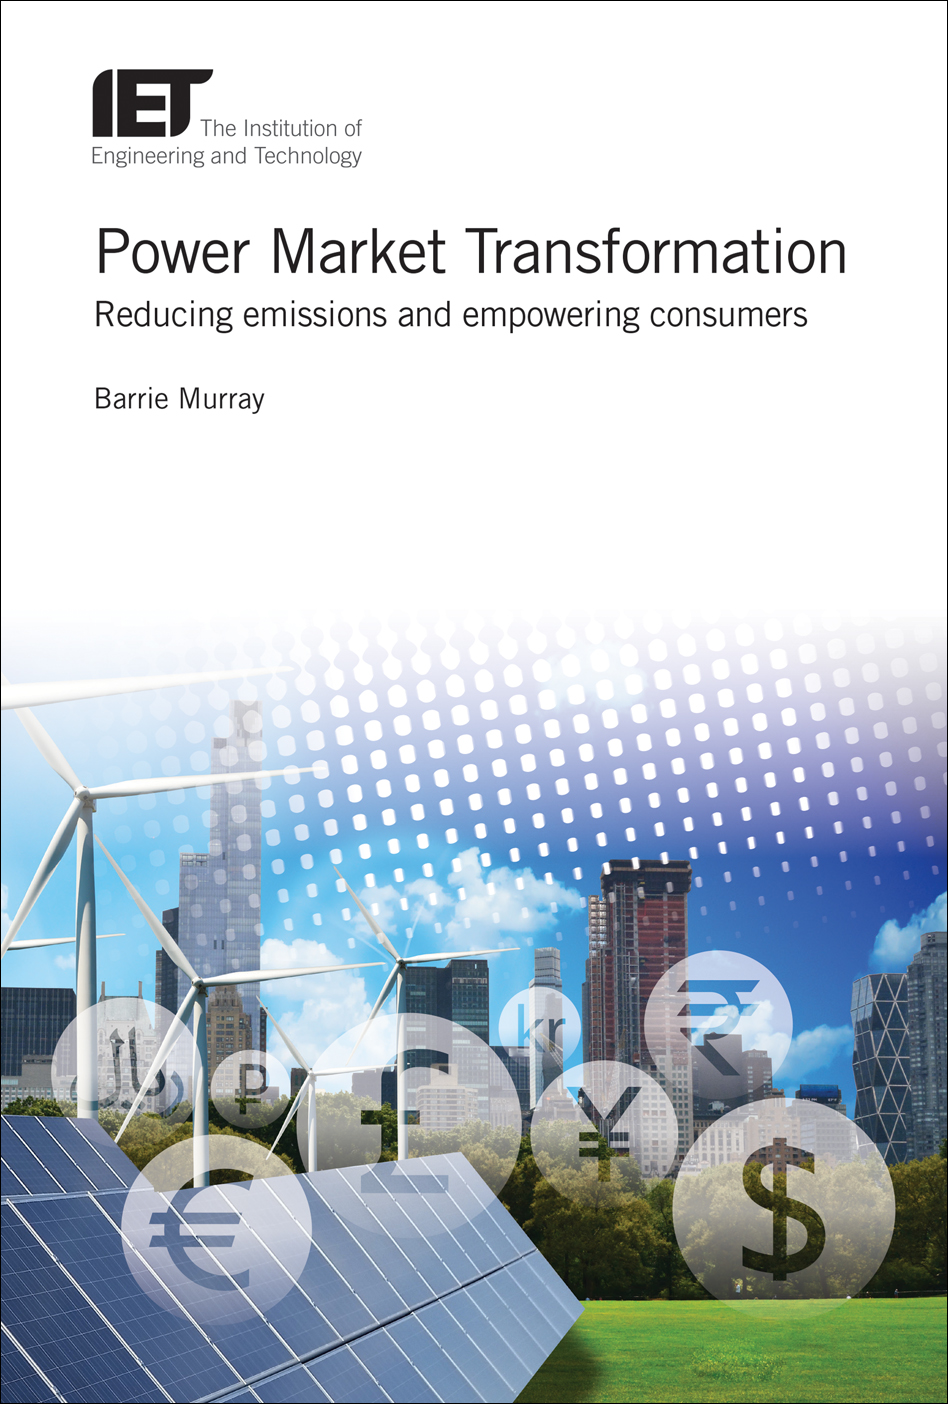 Power Market Transformation, Reducing emissions and empowering consumers